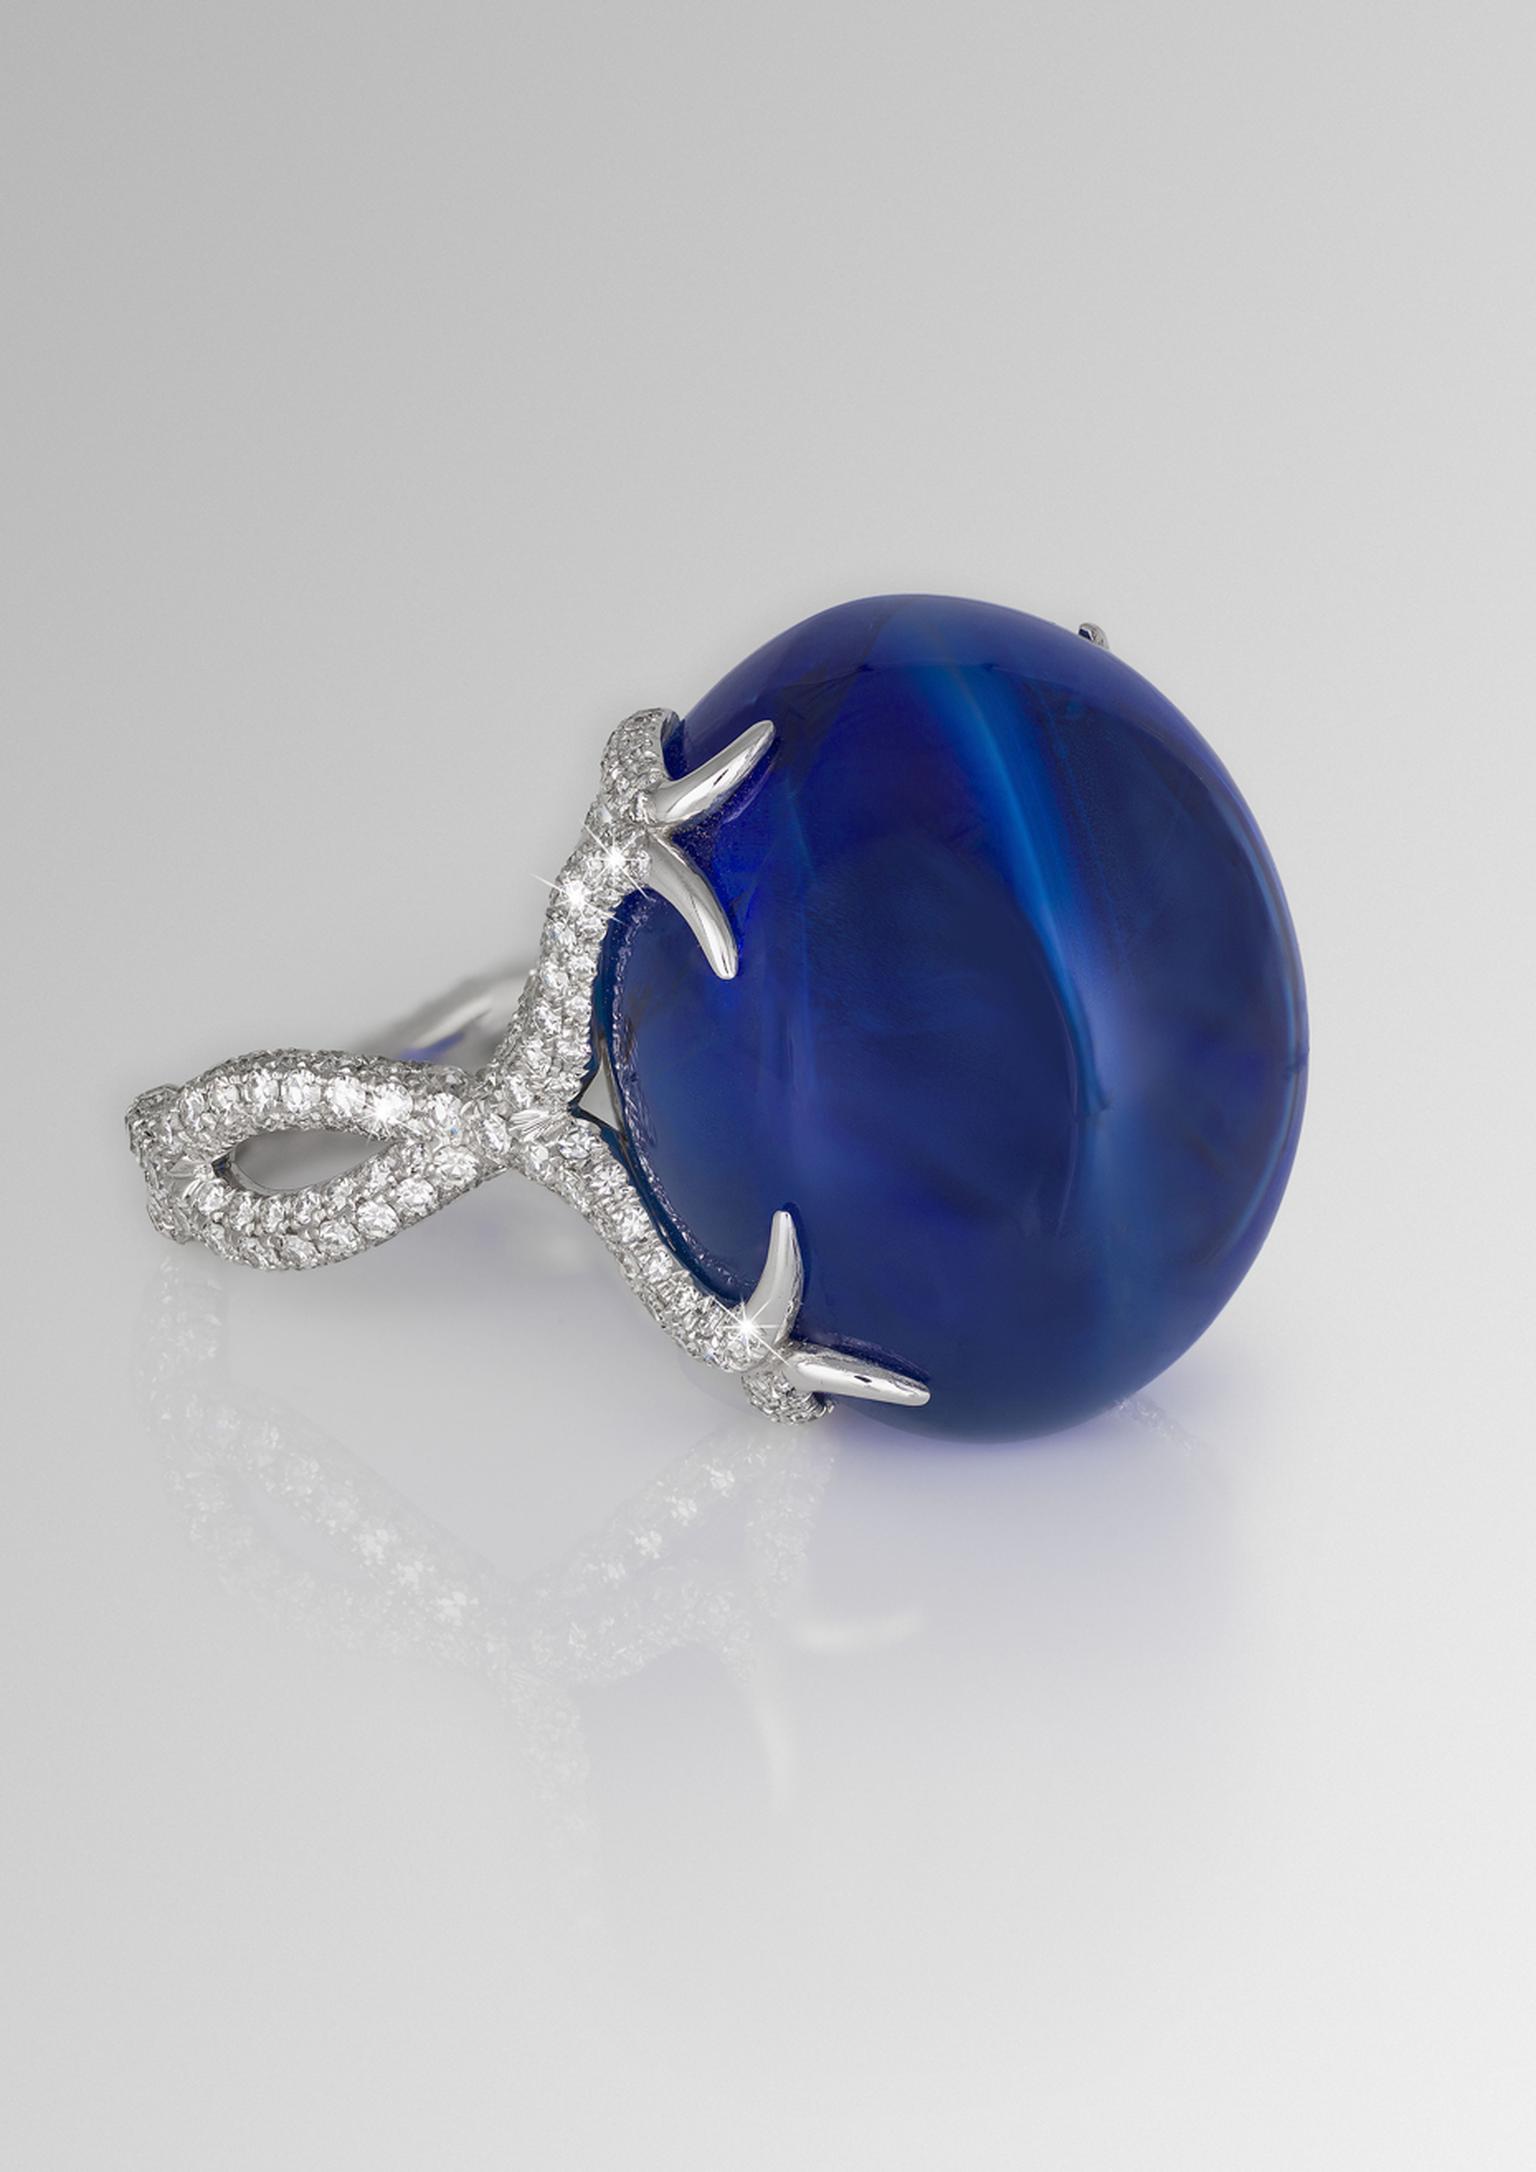 David Morris ring featuring a central 64.55ct blue Burmese double cabochon sapphire with a twisting diamond band.